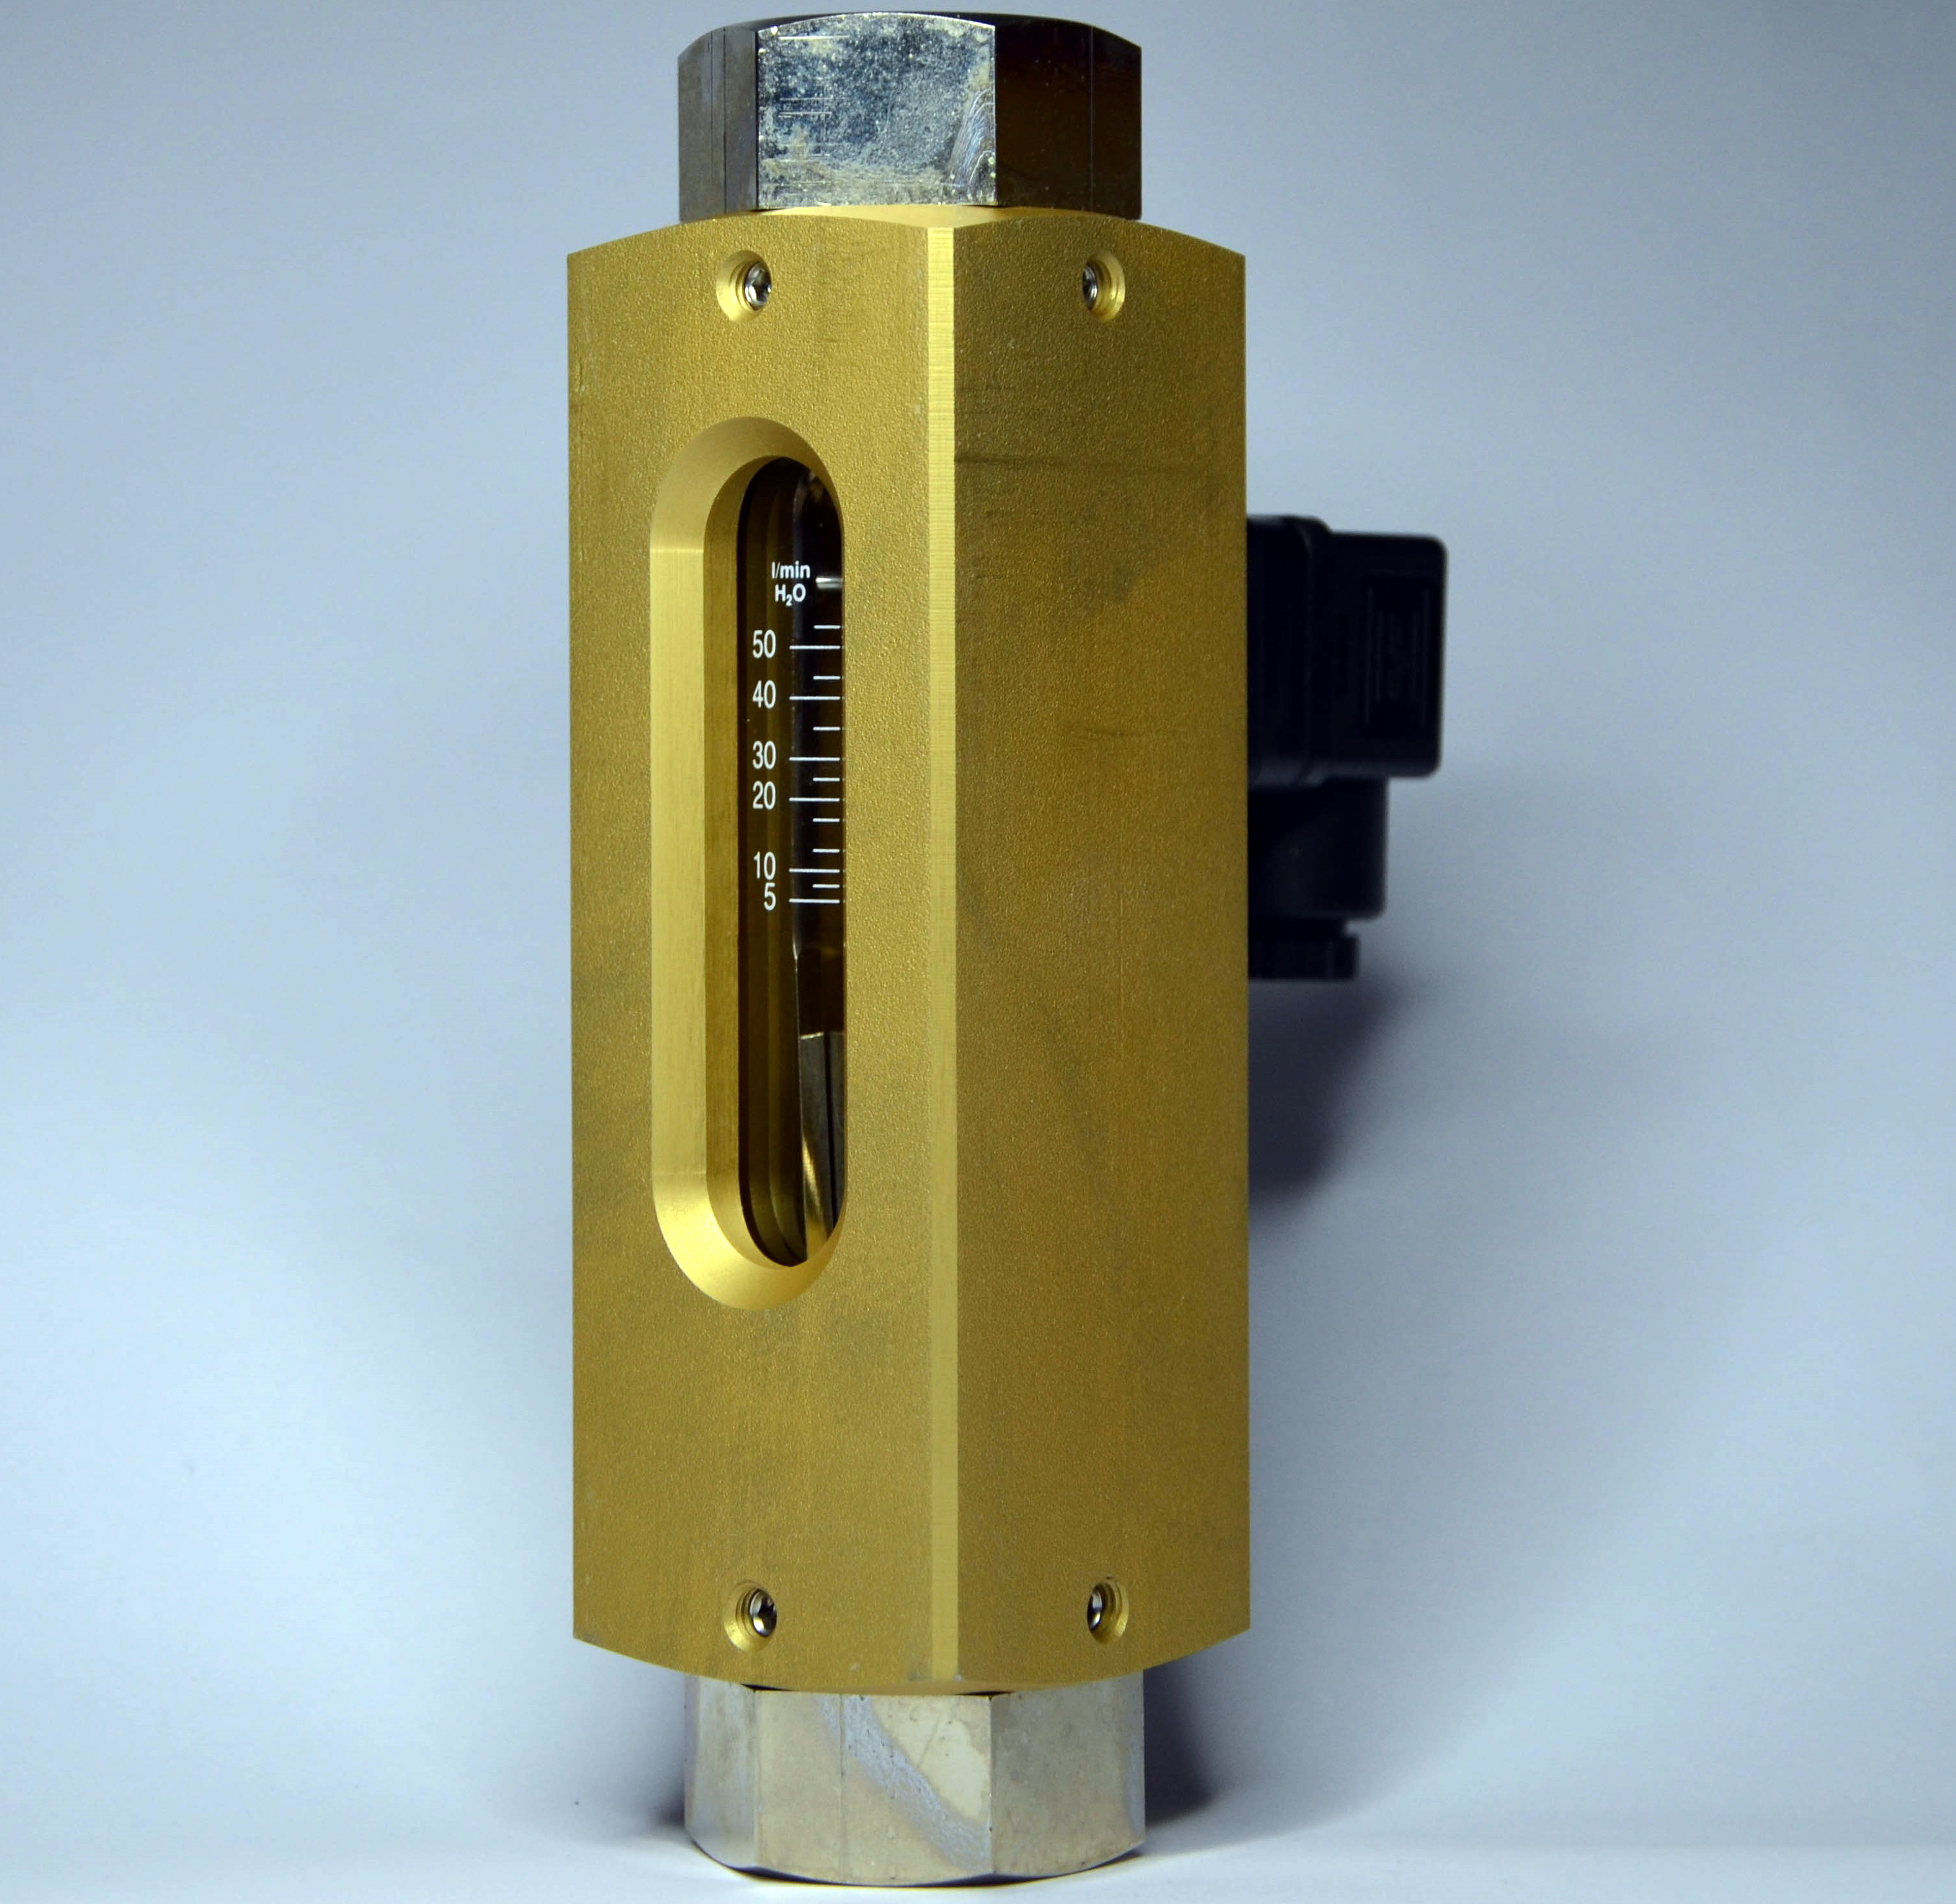 Flow monitor with an additional optical indicator